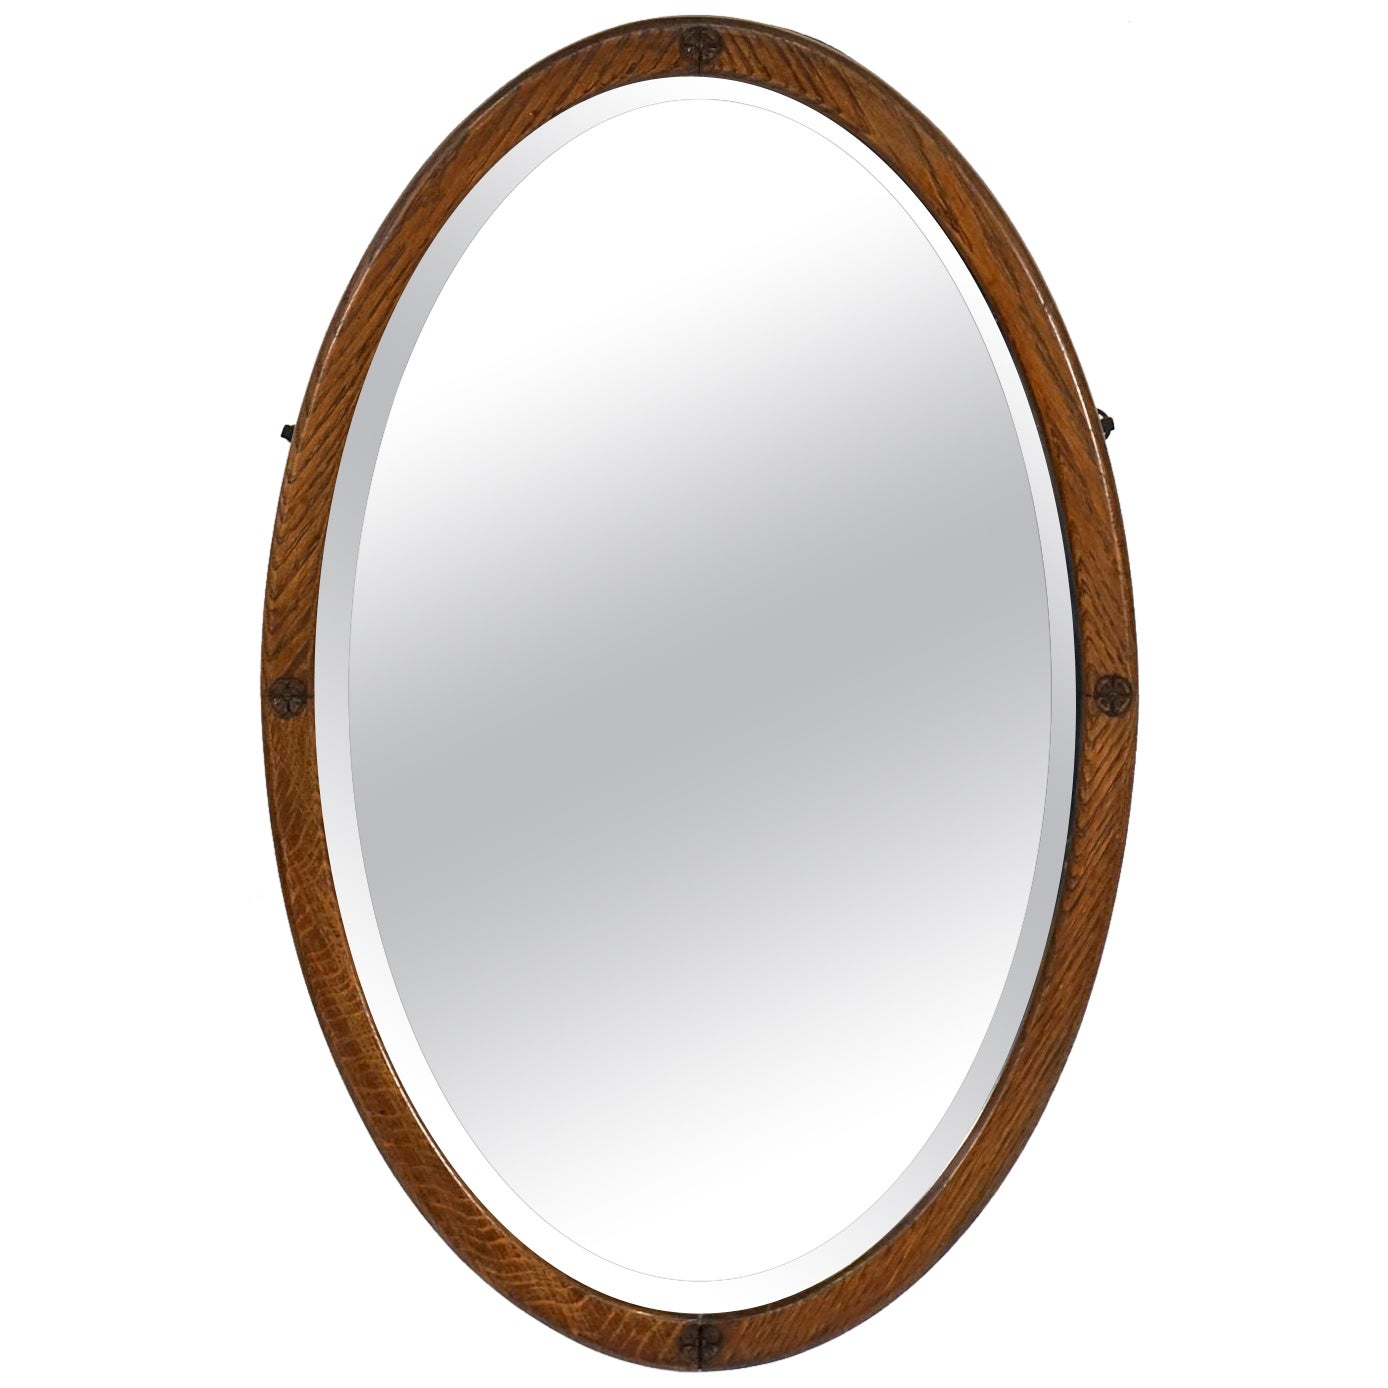 English Oval Parlour Mirror with Beveled Glass and Oak Frame (H 27 3/4 x W 18)